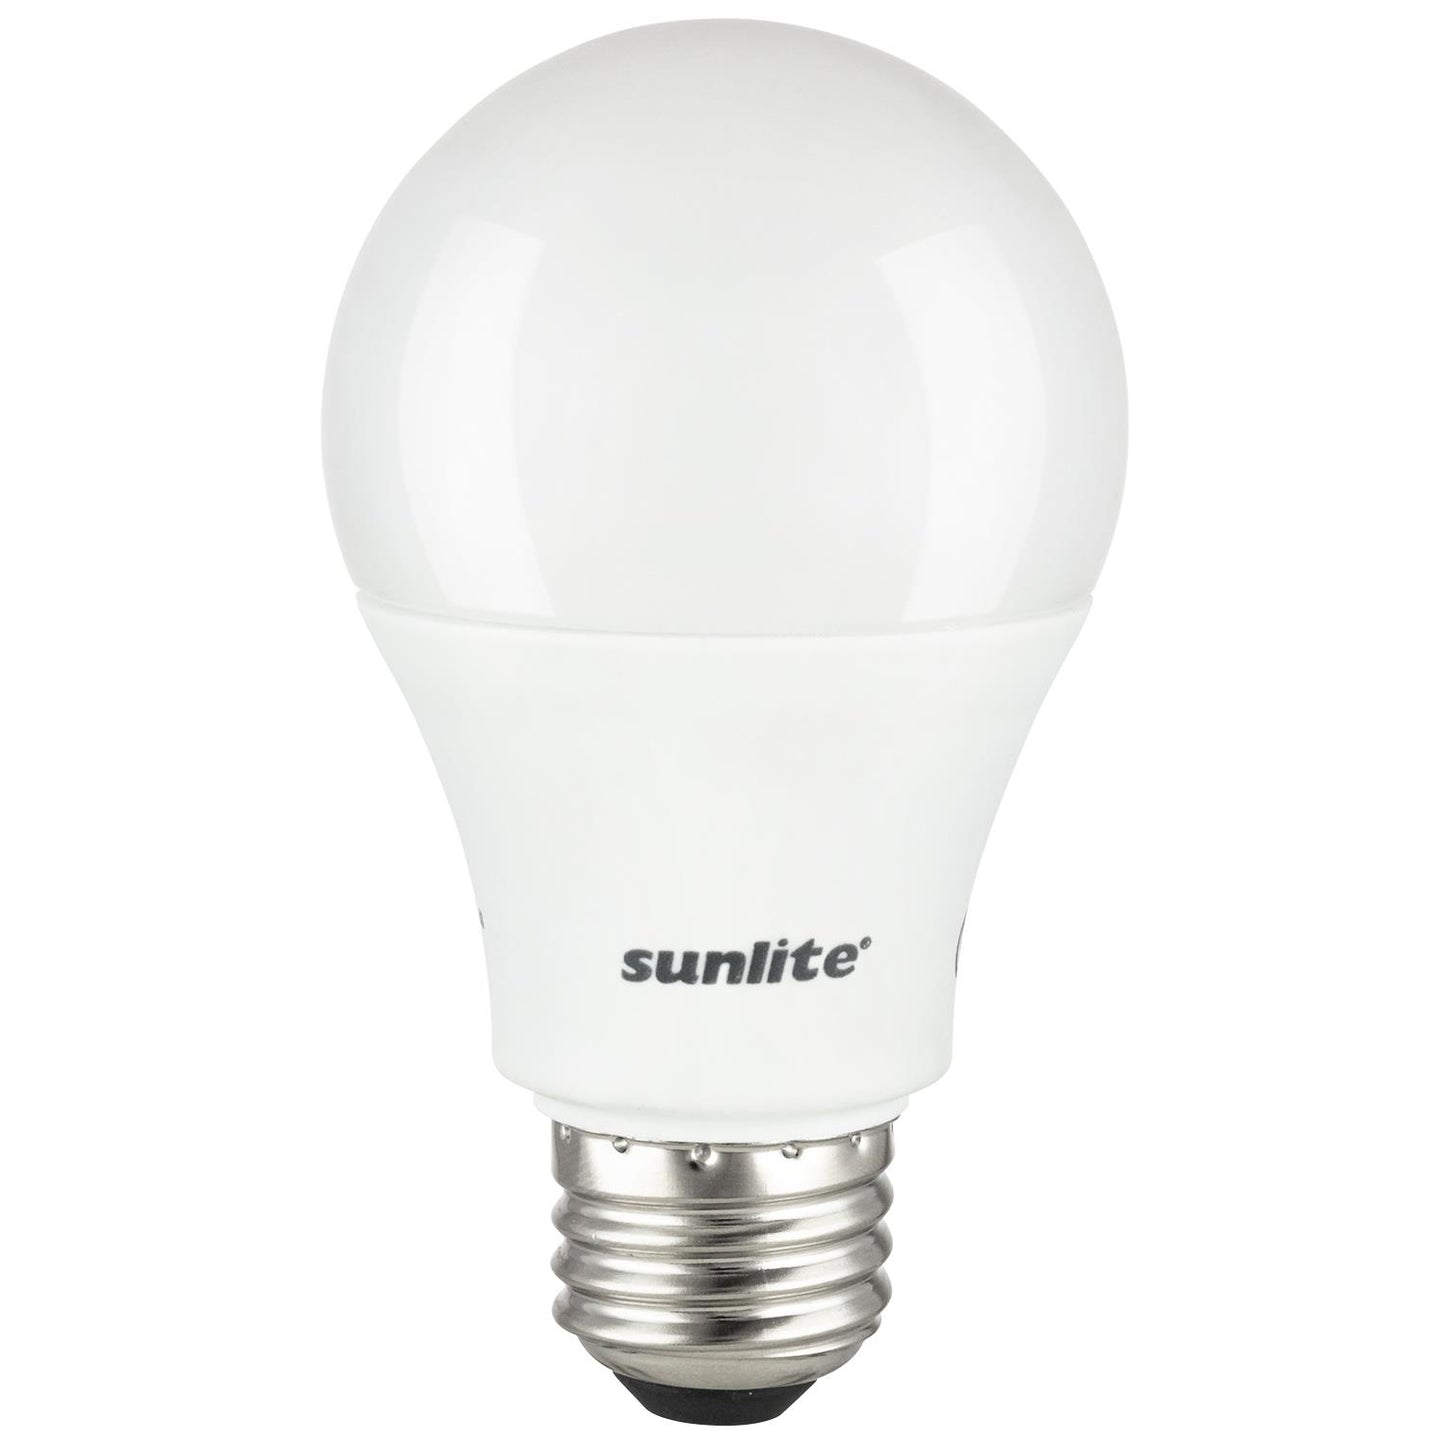 Sunlite 80834-SU LED A19 Standard Household Bulb, Frosted, Cool White 3 Pack